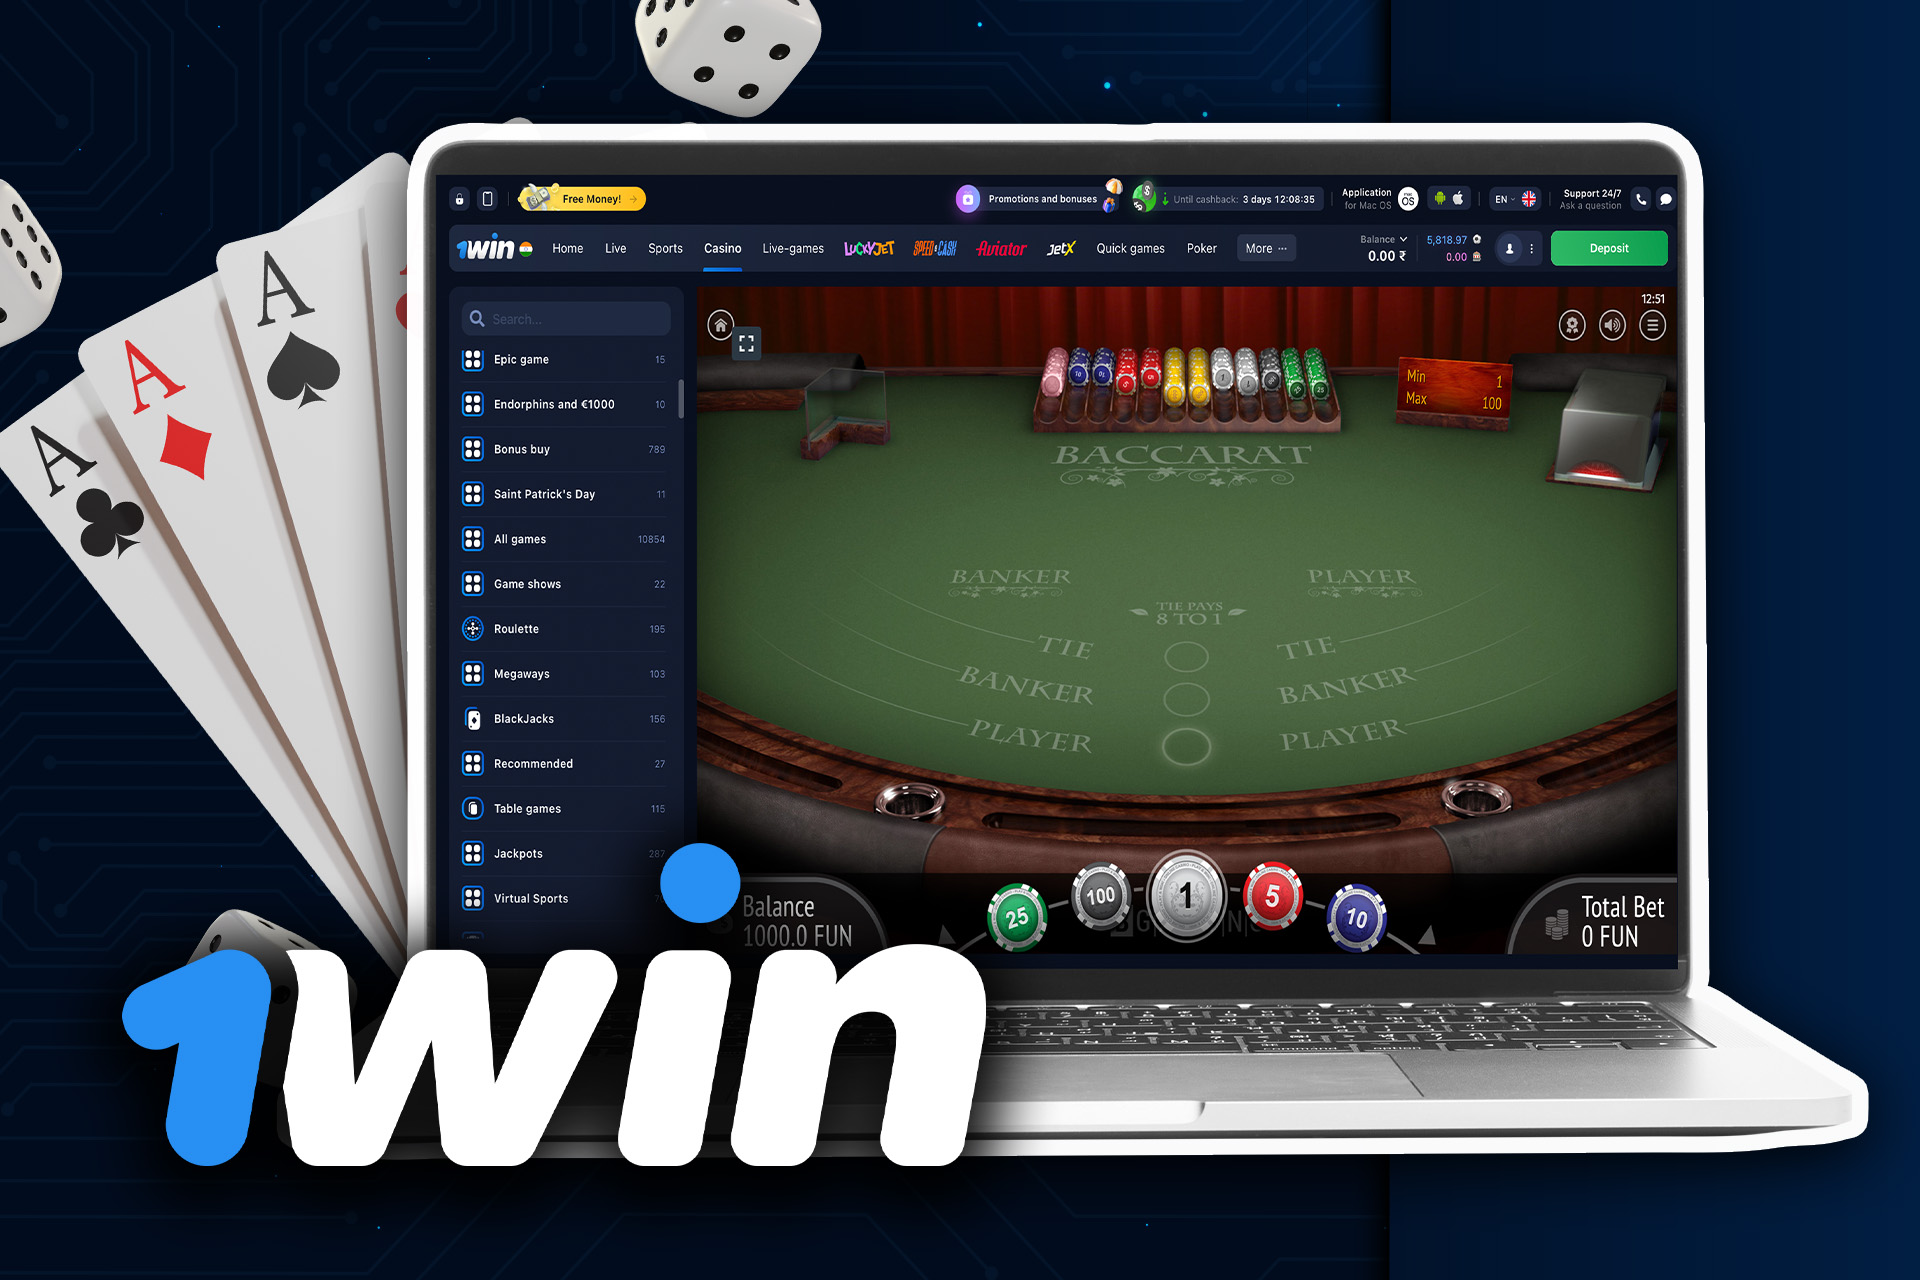 1win also offers to play baccarat - a traditional card game.